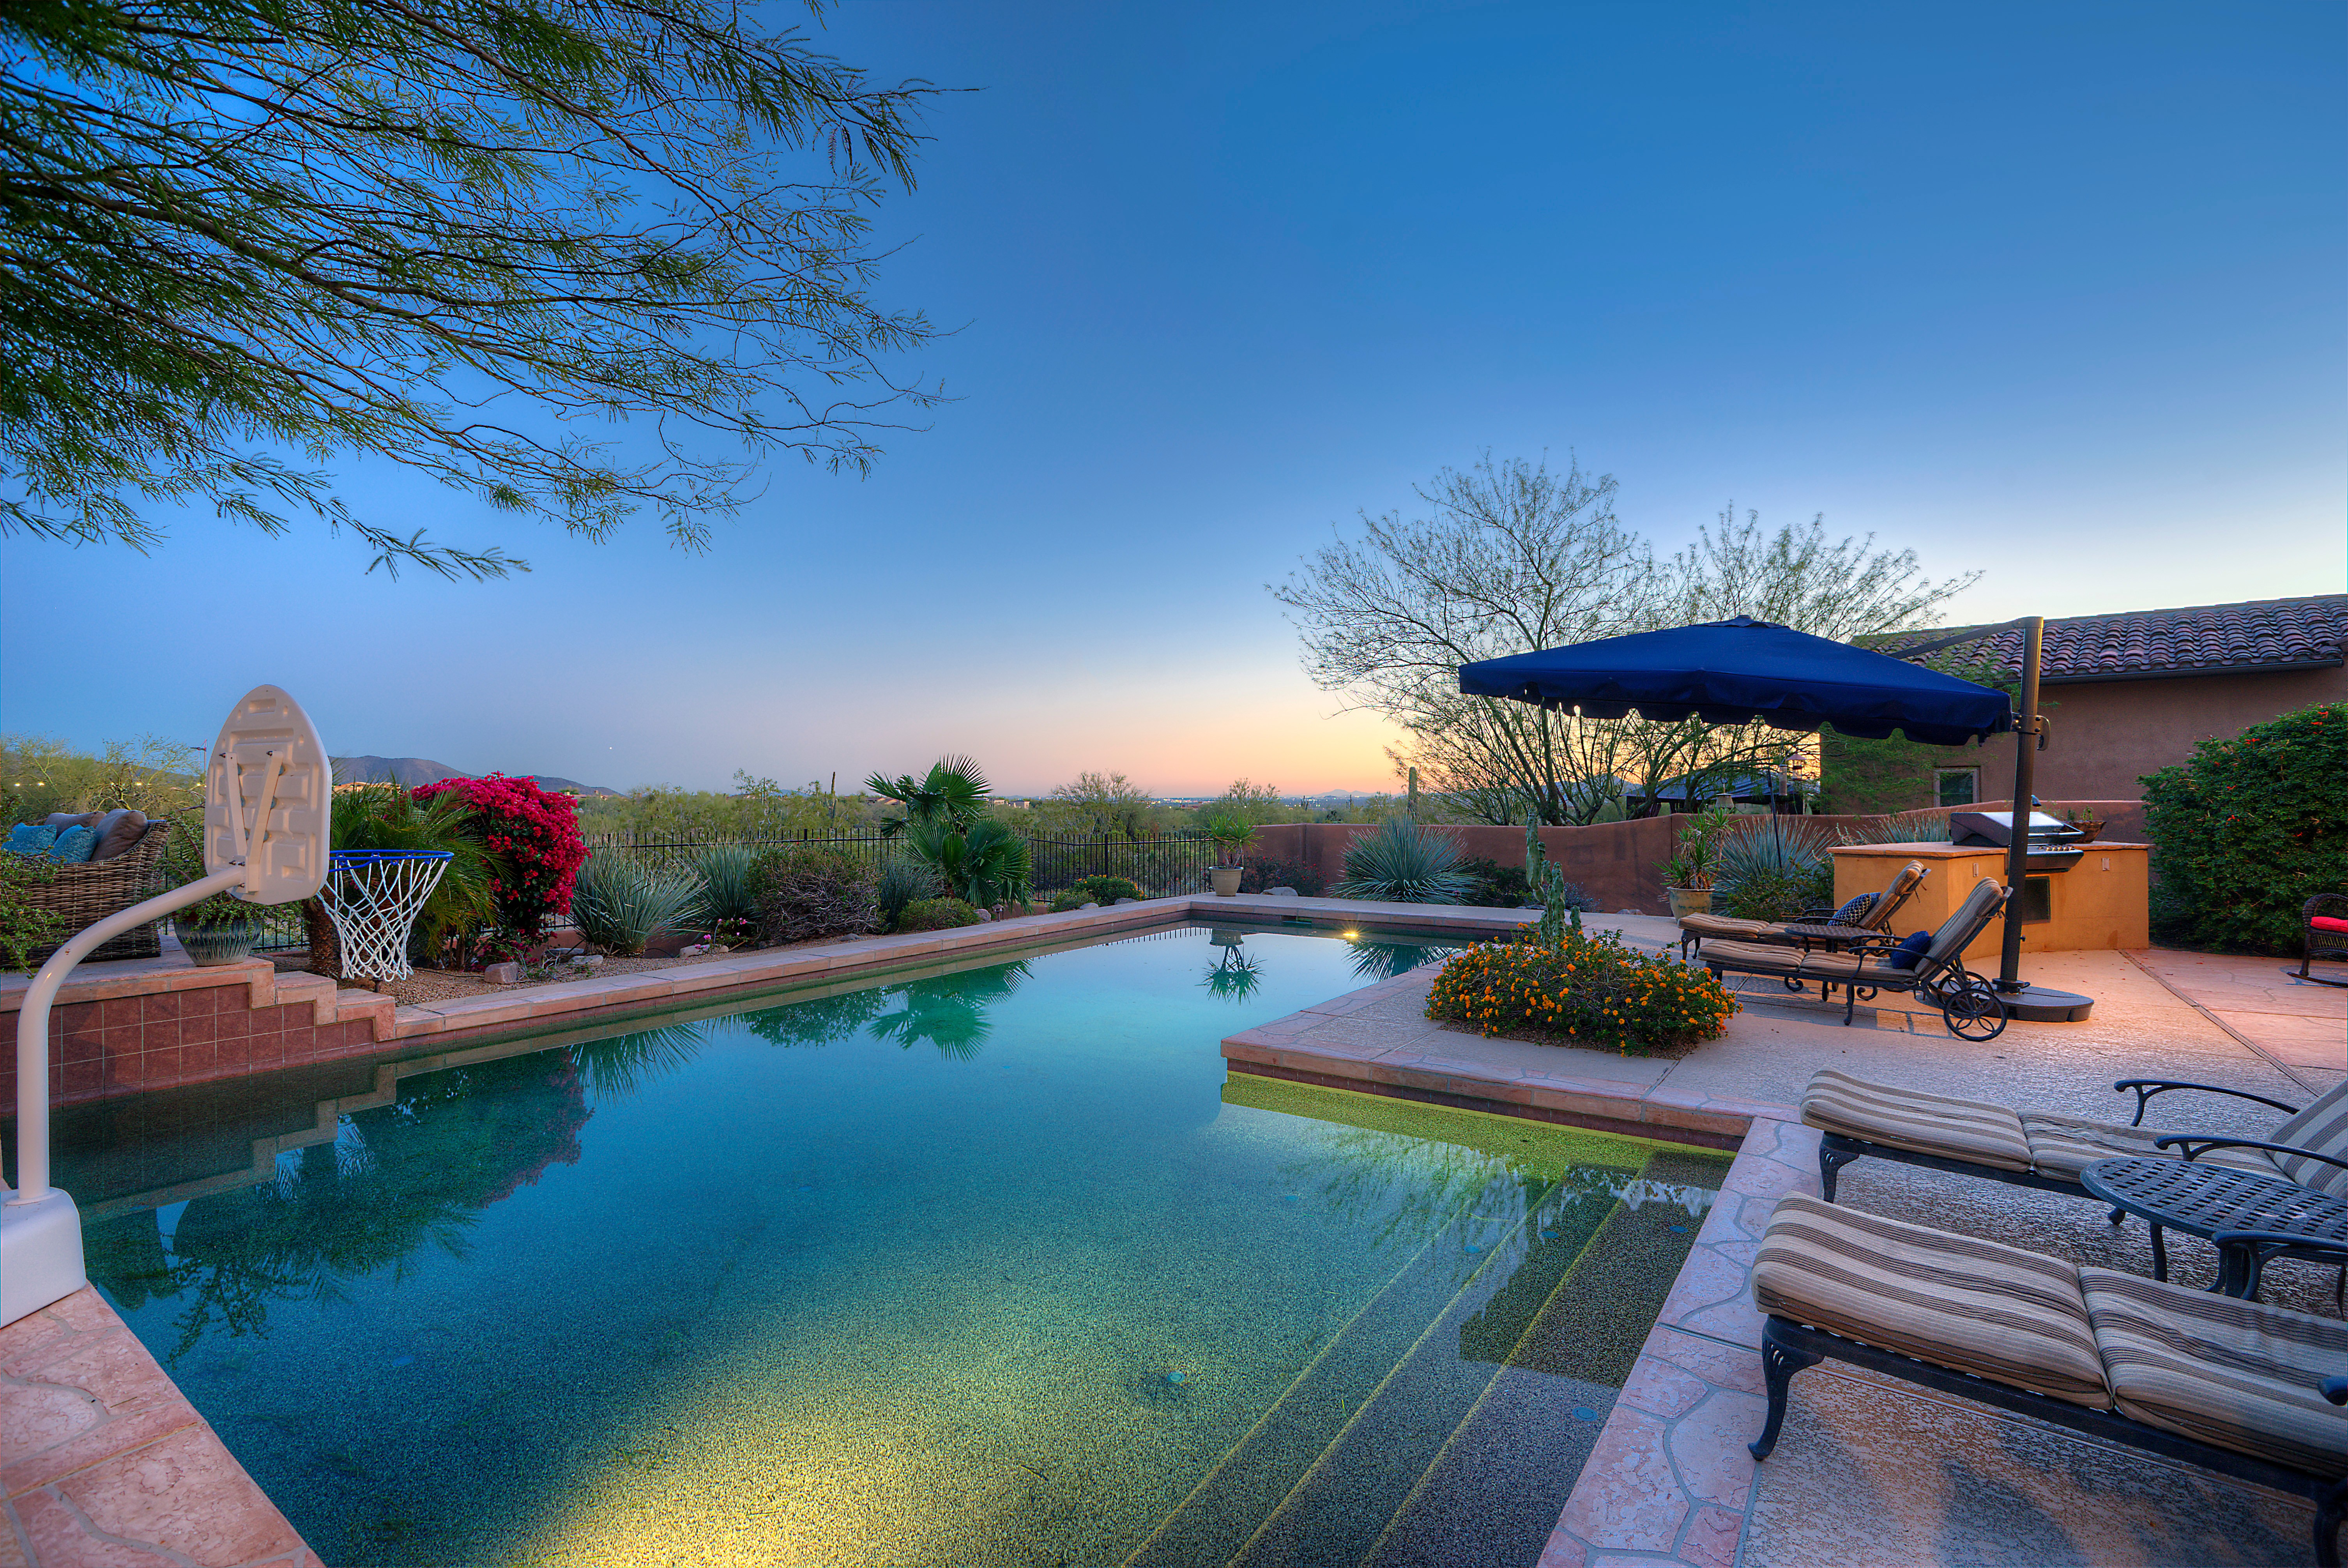 Poolside views at this Scottsdale home for sale in DC Ranch located at 19829 N 97th Pl Scottsdale, AZ 85255 listed by Don Matheson at The Matheson Team